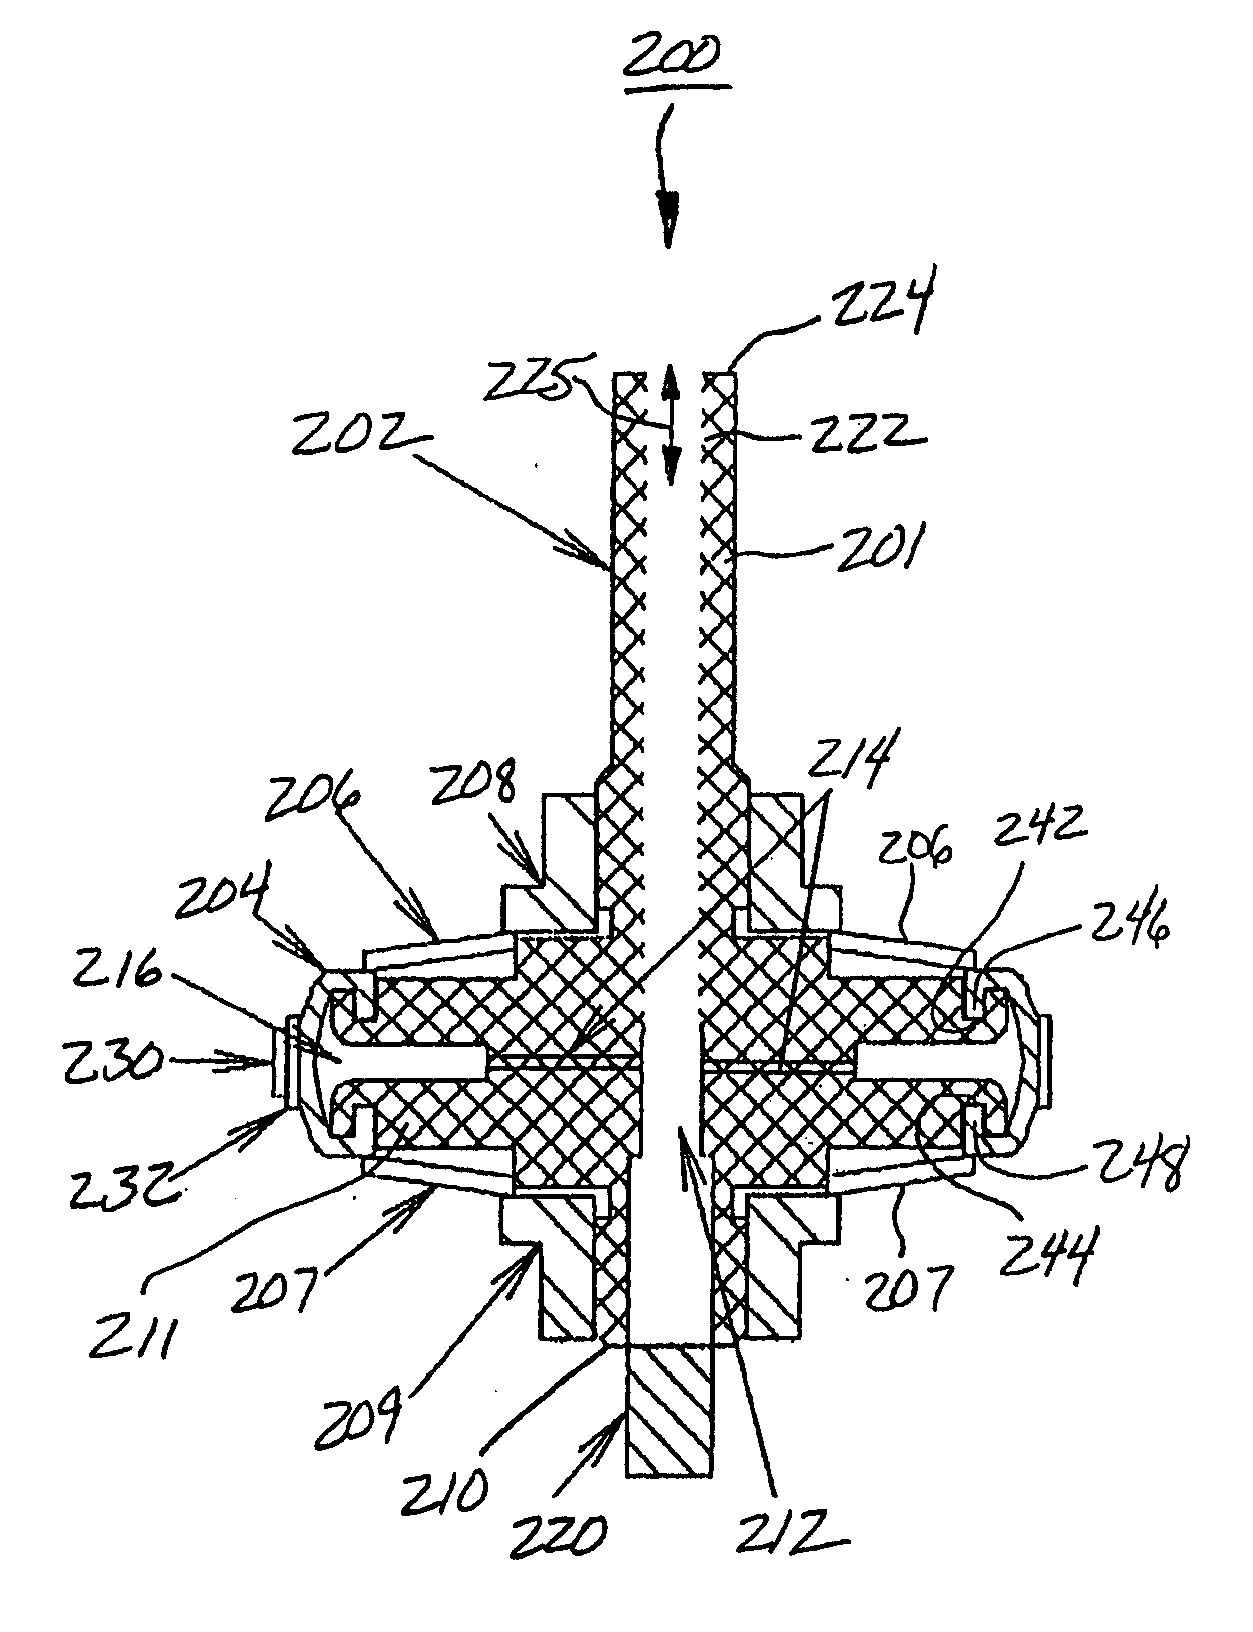 Tool, apparatus, and method for precision polishing of lenses and lens molds